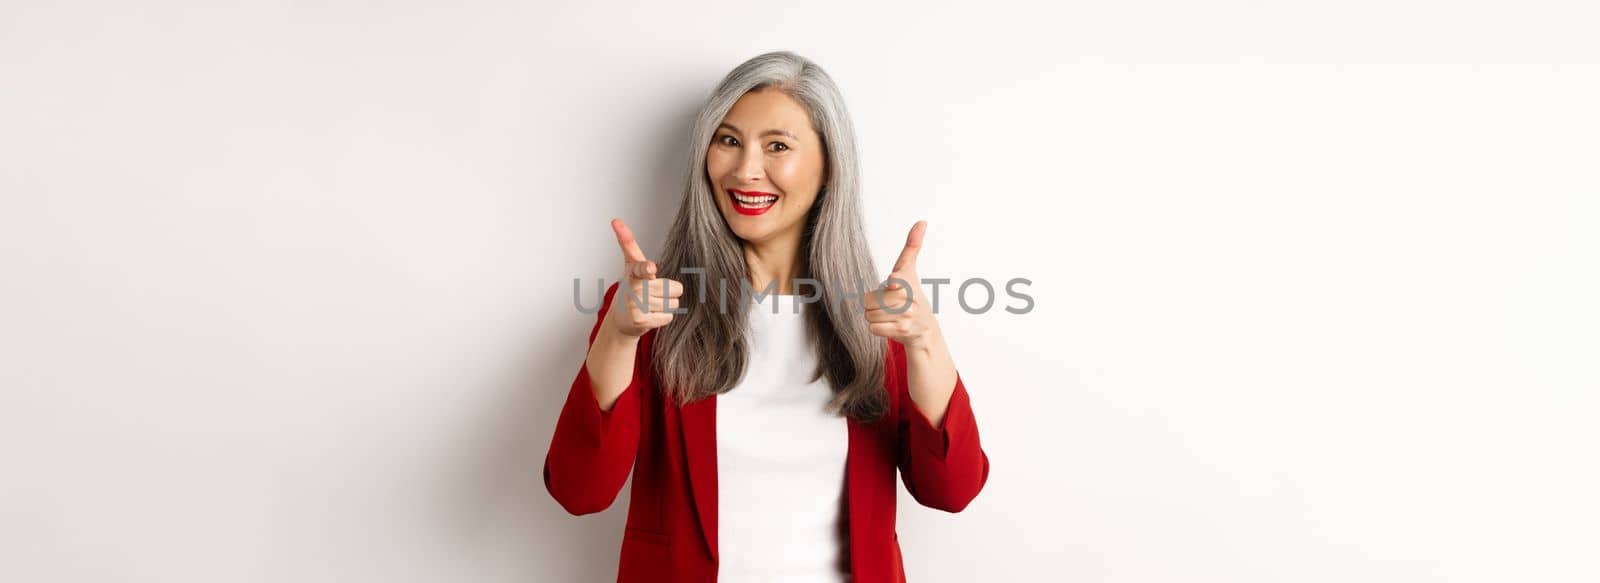 Professional female employer in trendy red blazer and makeup, pointing fingers at camera and smiling, praising something, need you, standing over white background.